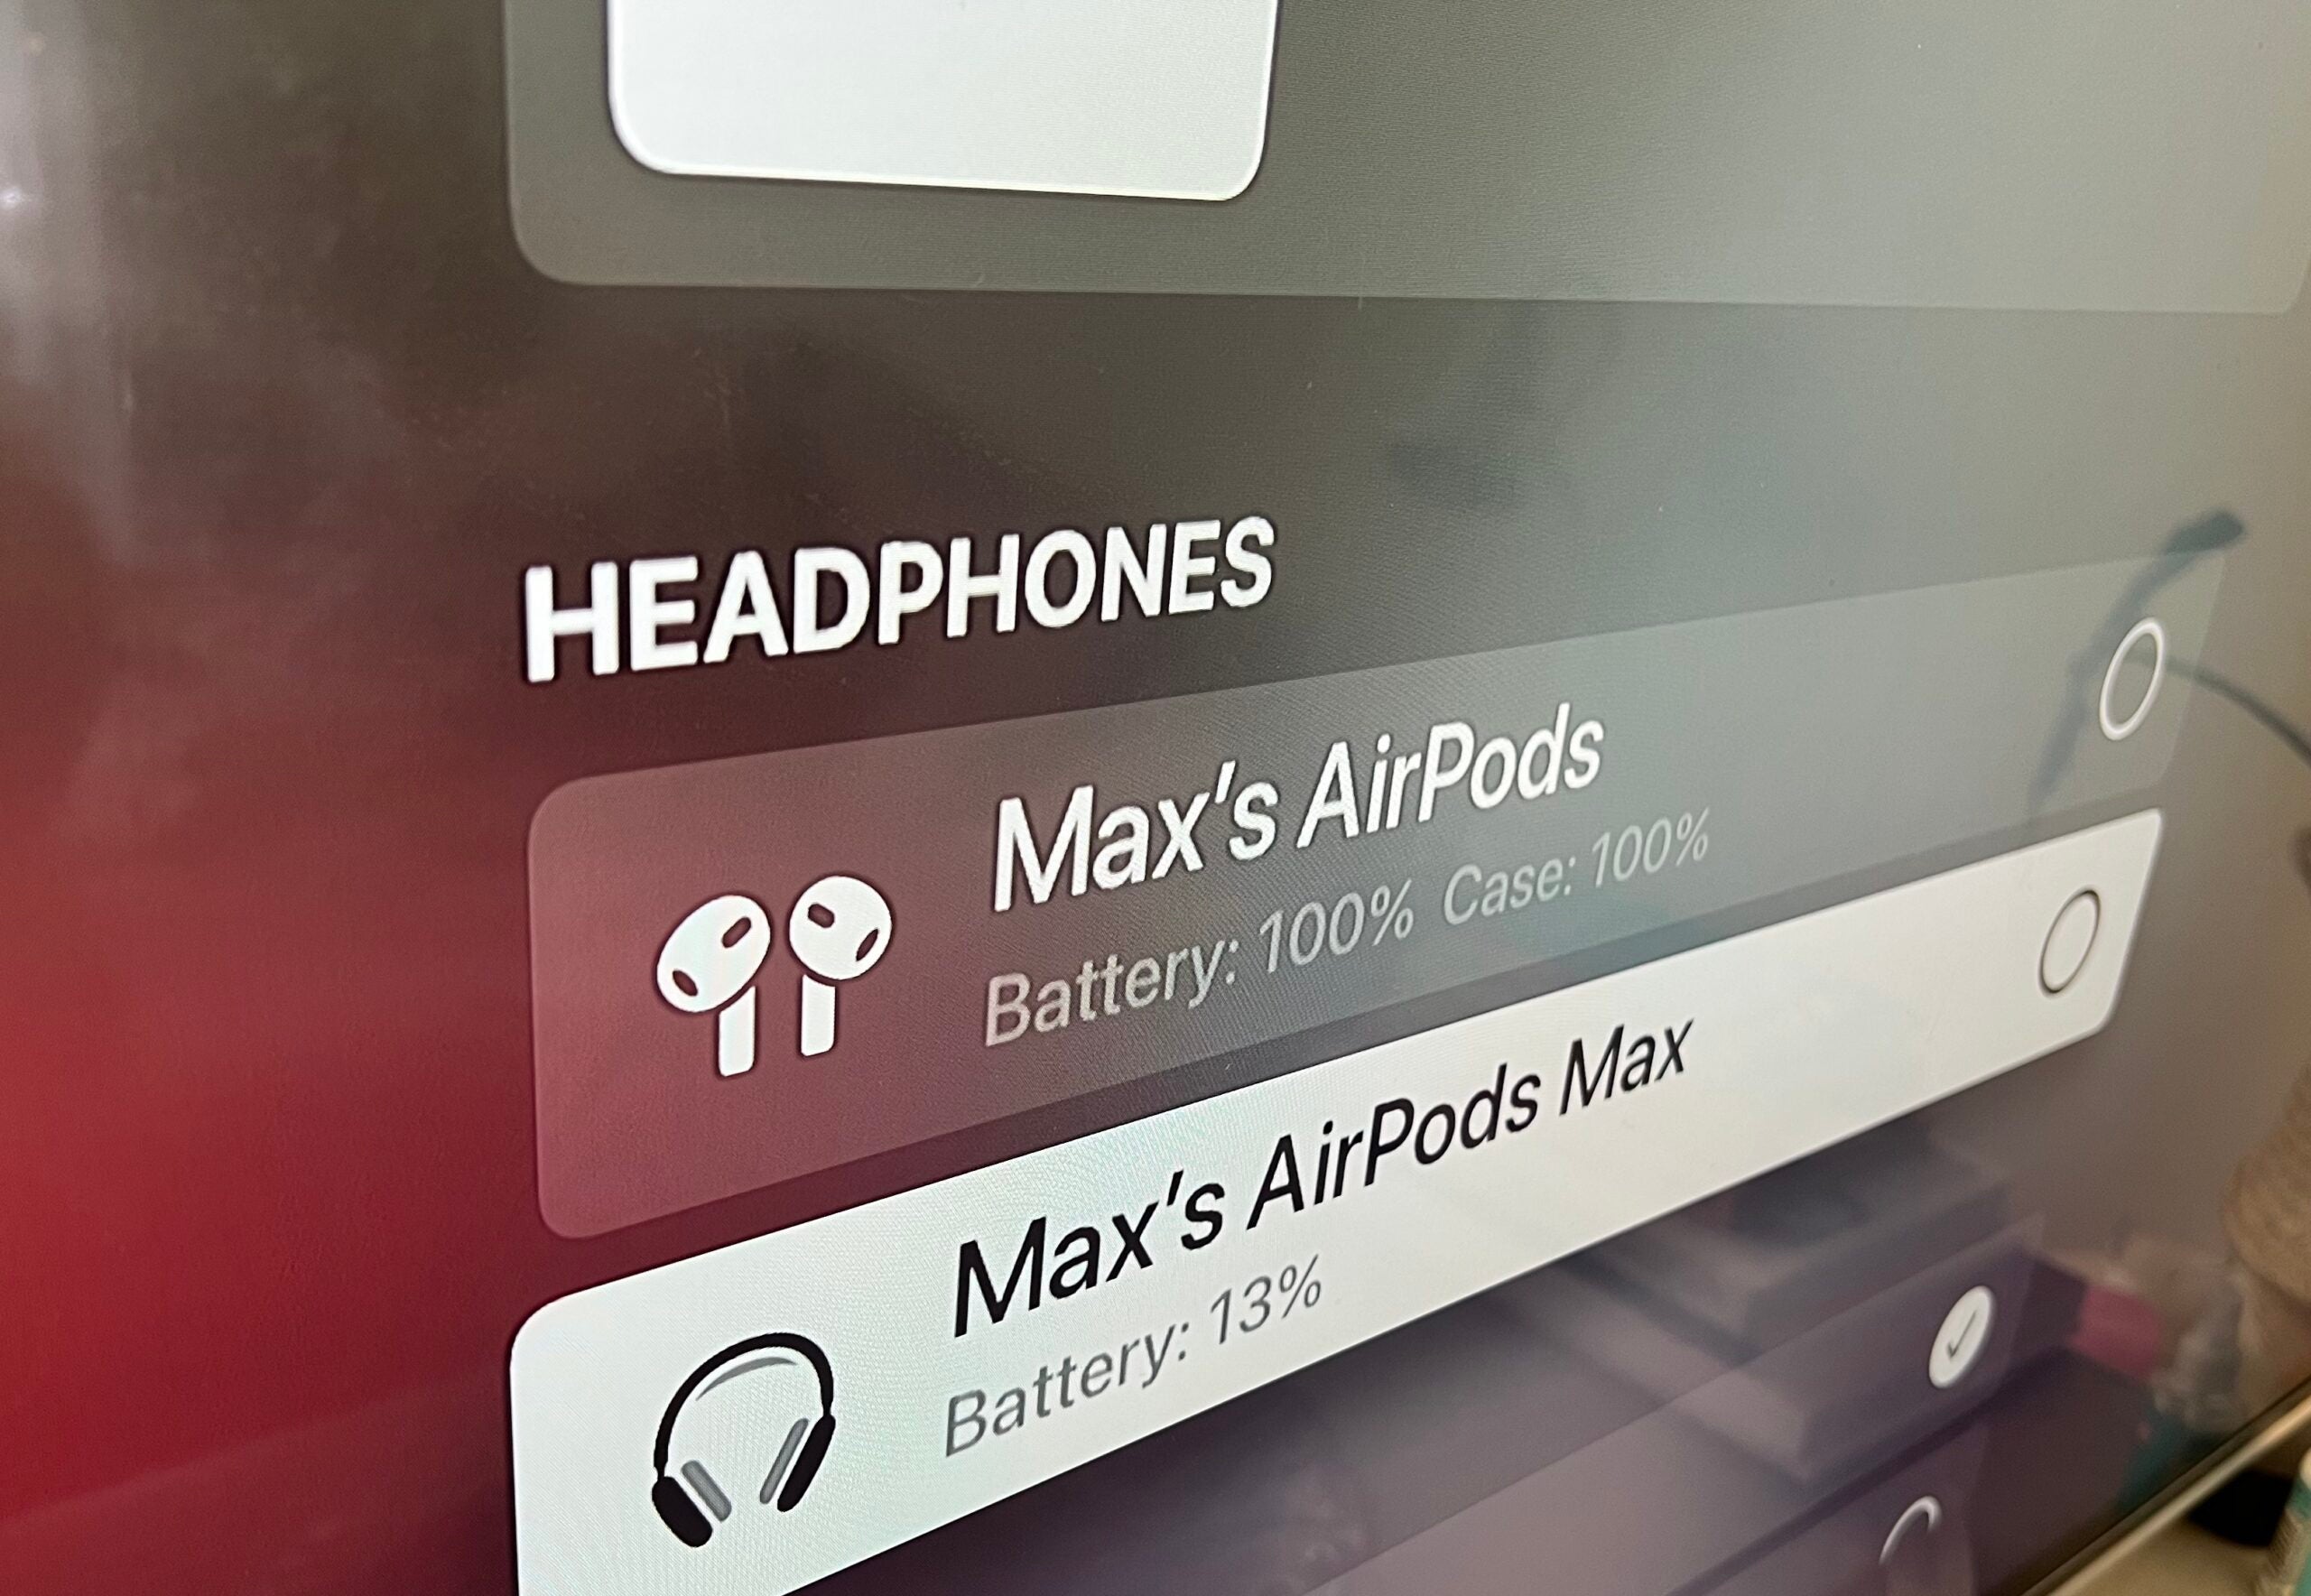 how to connect airpods Select your AirPods from the list 2